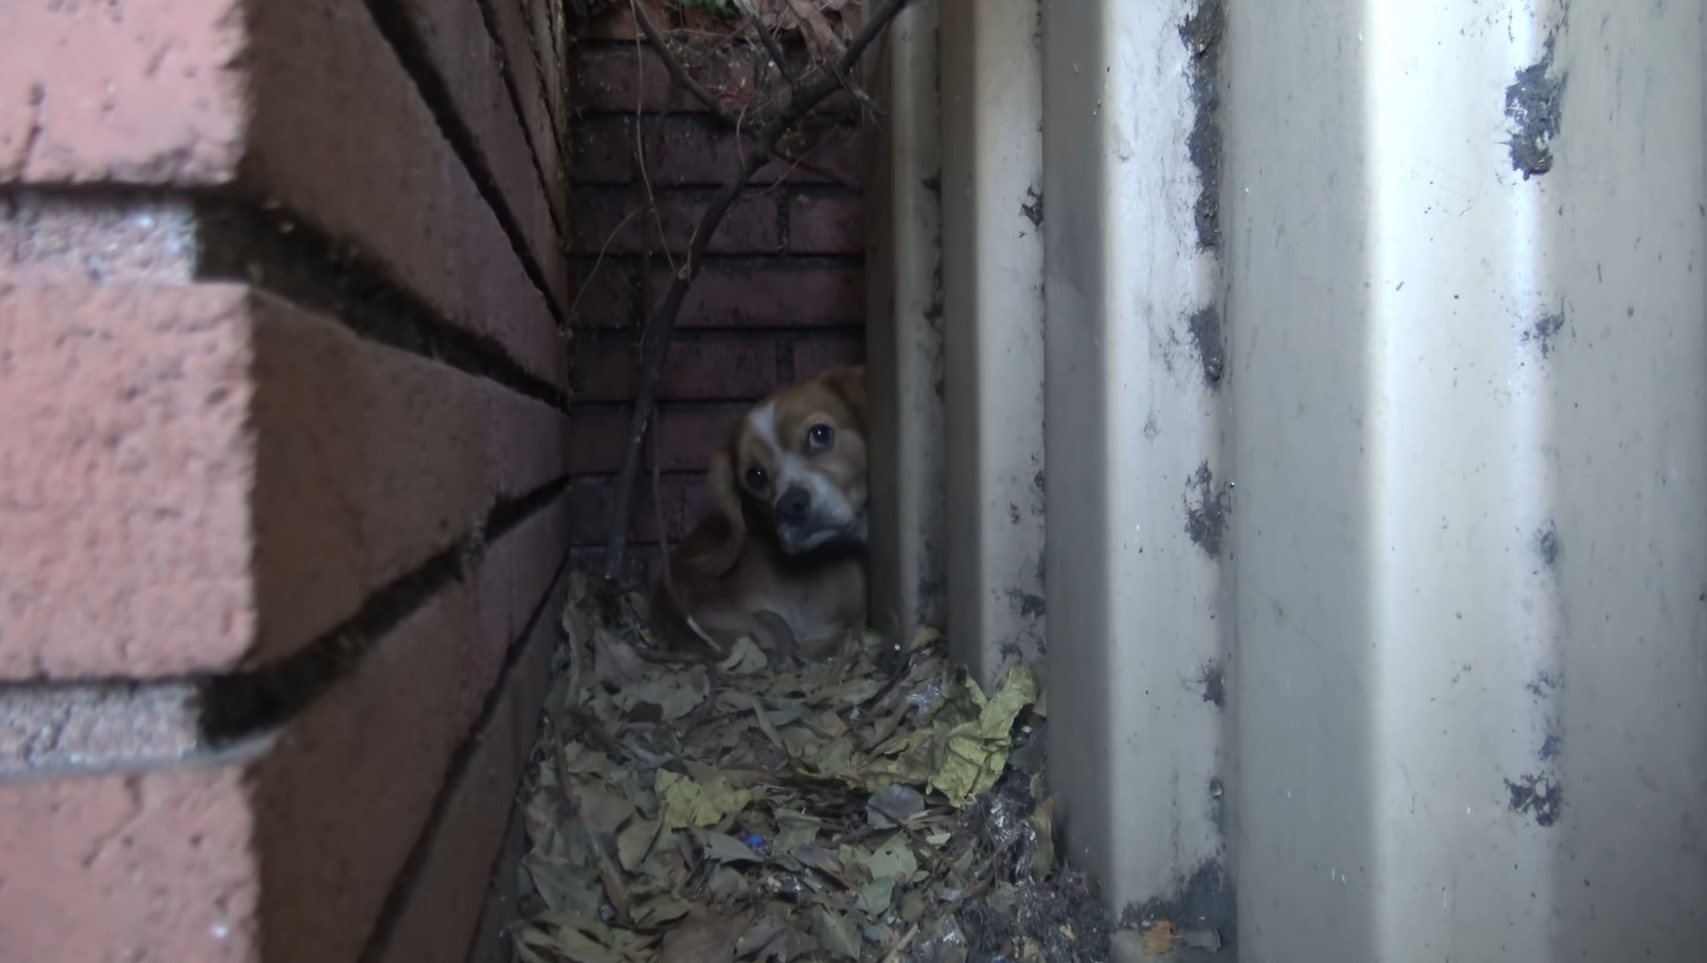 a terrified dog peeks out from behind the wall